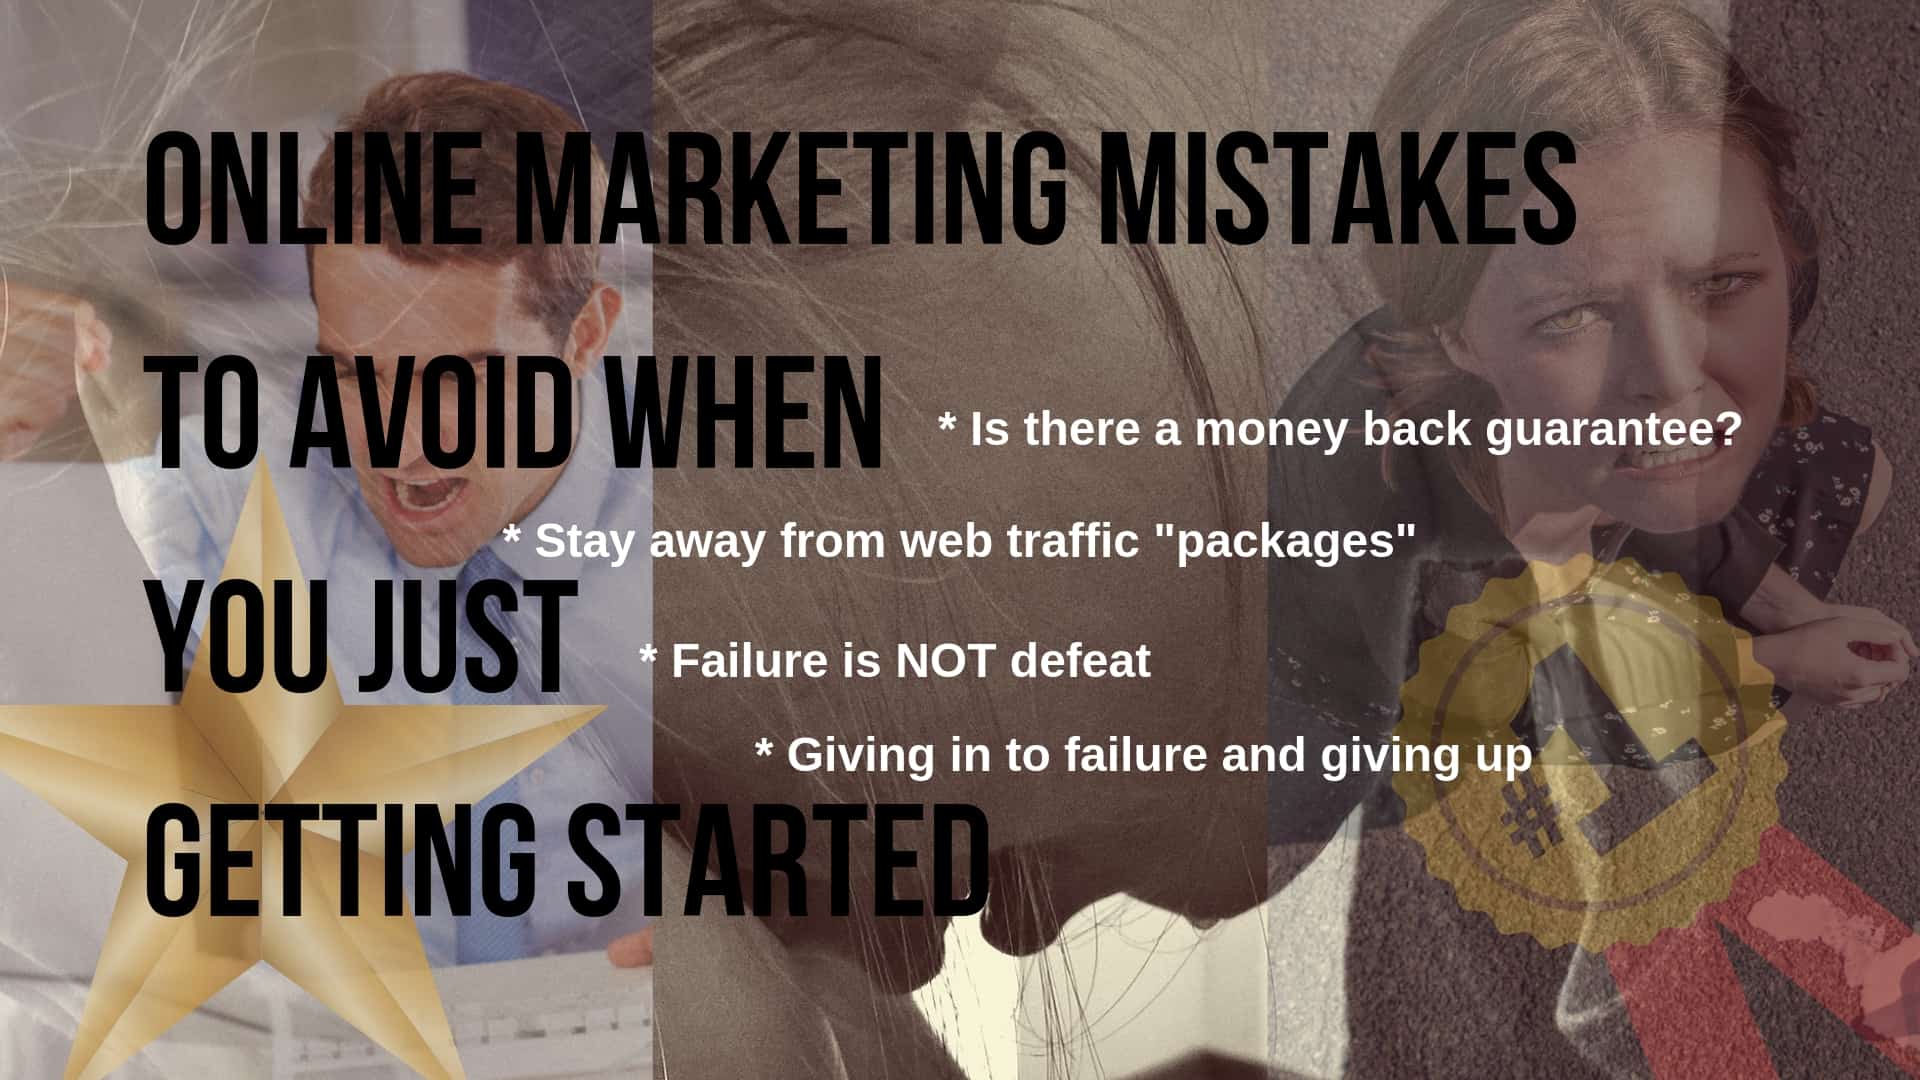 Online marketing mistakes to avoid when you just getting started